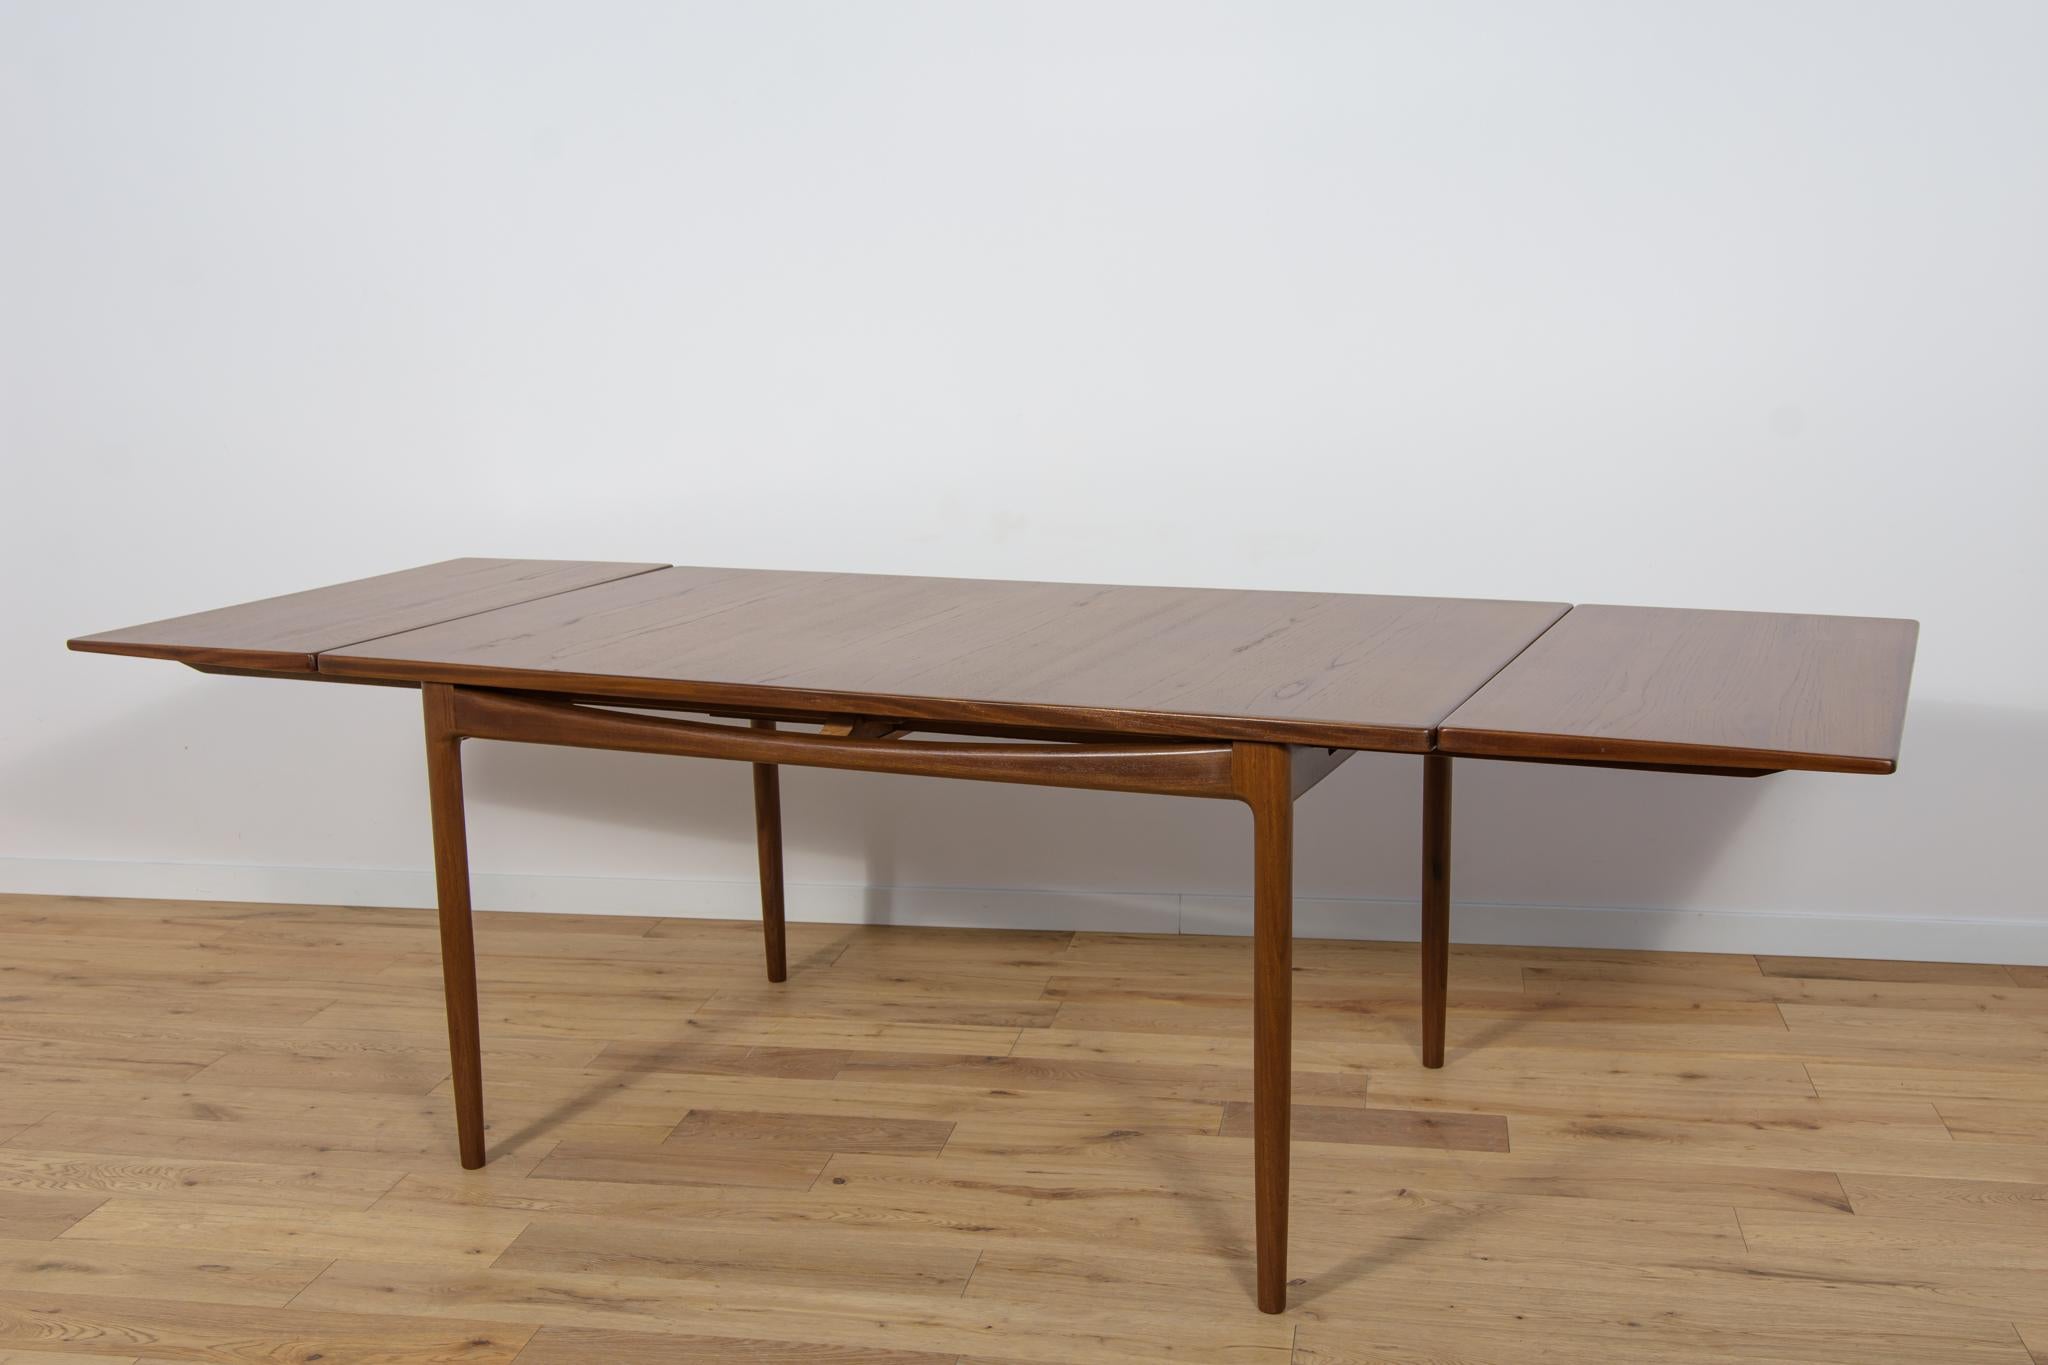 Teak Mid-Century Dining Table by Ib Kofod Larsen for G-Plan, 1960s For Sale